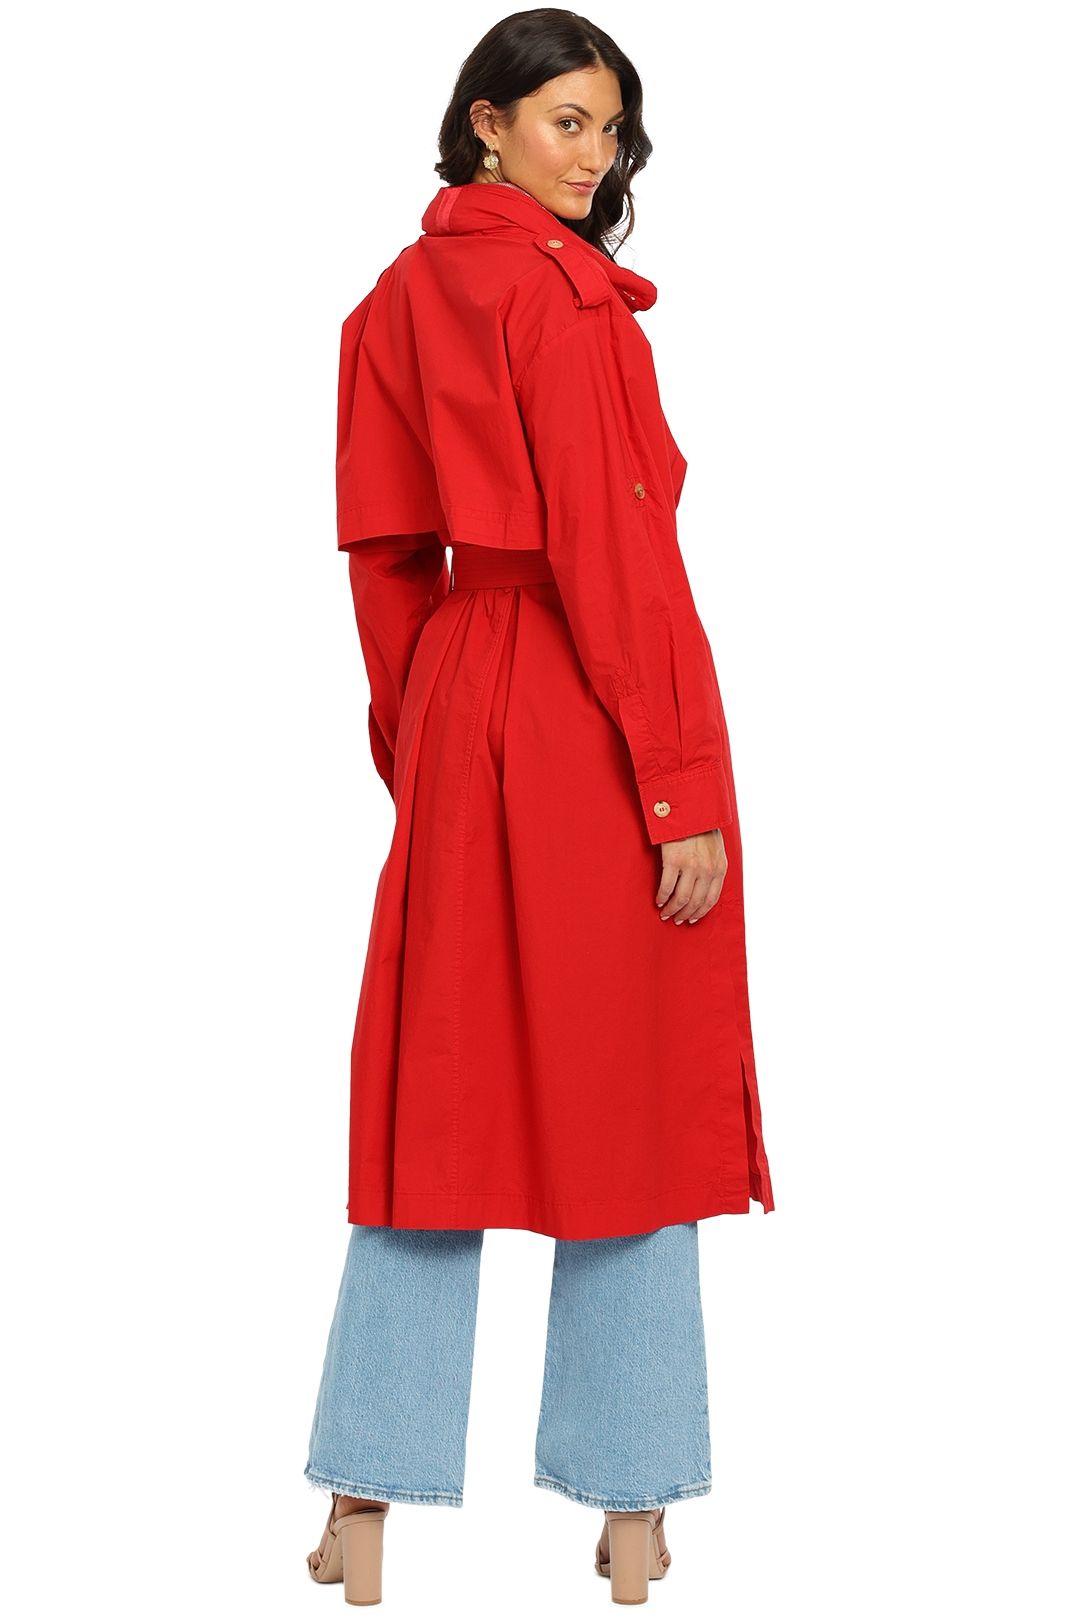 Tommy Hilfiger Icon Fluid Trench Red belted